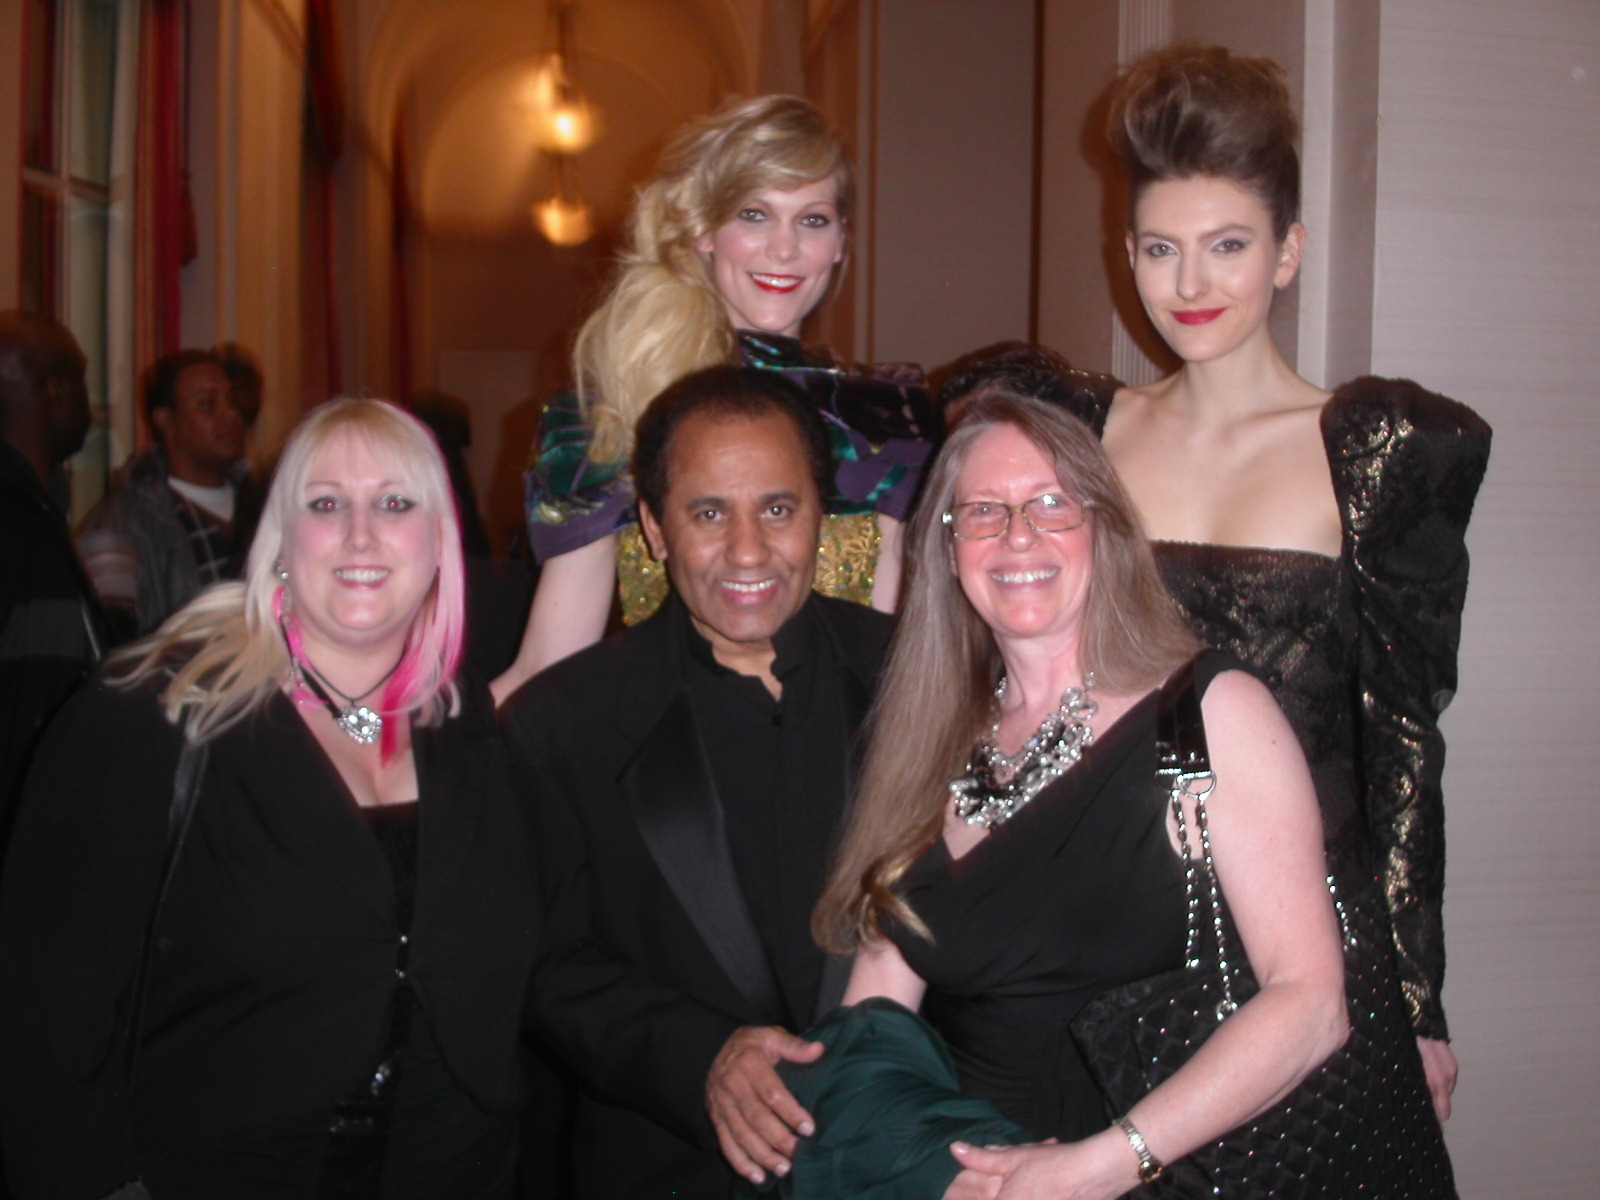 Author Pamela S. K. Glasner and Screenwriter Deborah Louise Robinson with Fashion Designer Andres Aquino & two of his models @ Couture Fashion Week at the Waldorf-Astoria on Park Avenue in New York City, 19 February 2011